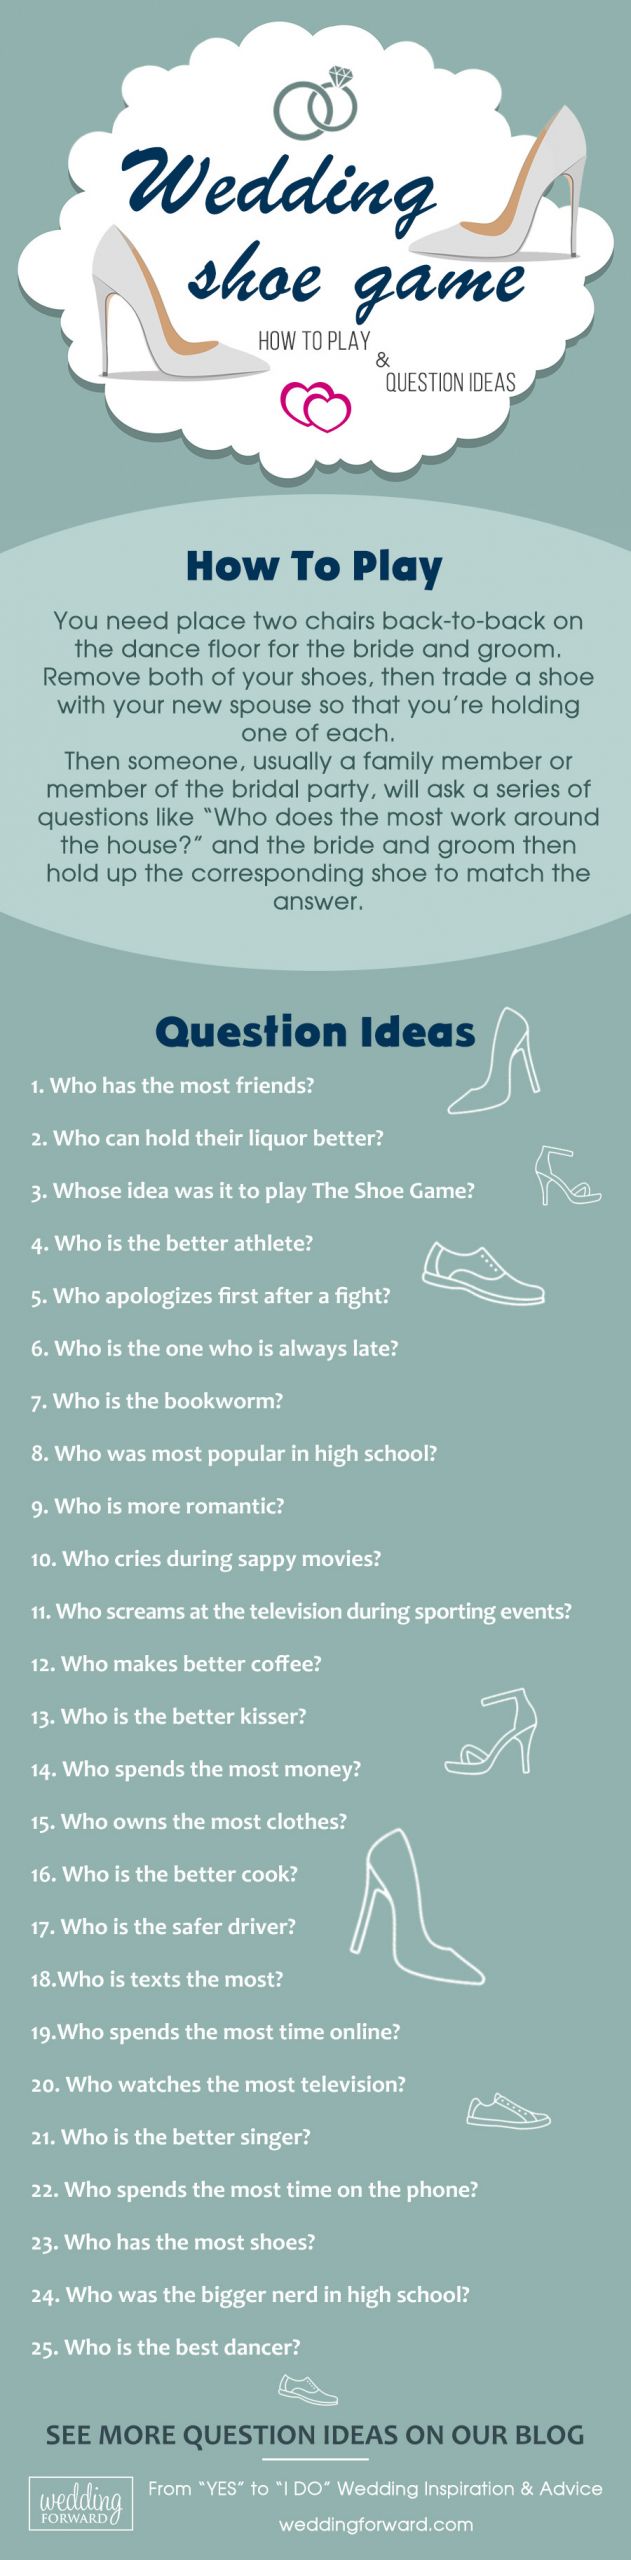 Shoe Game Wedding Questions
 The Shoe Game – How To Play and Question Ideas